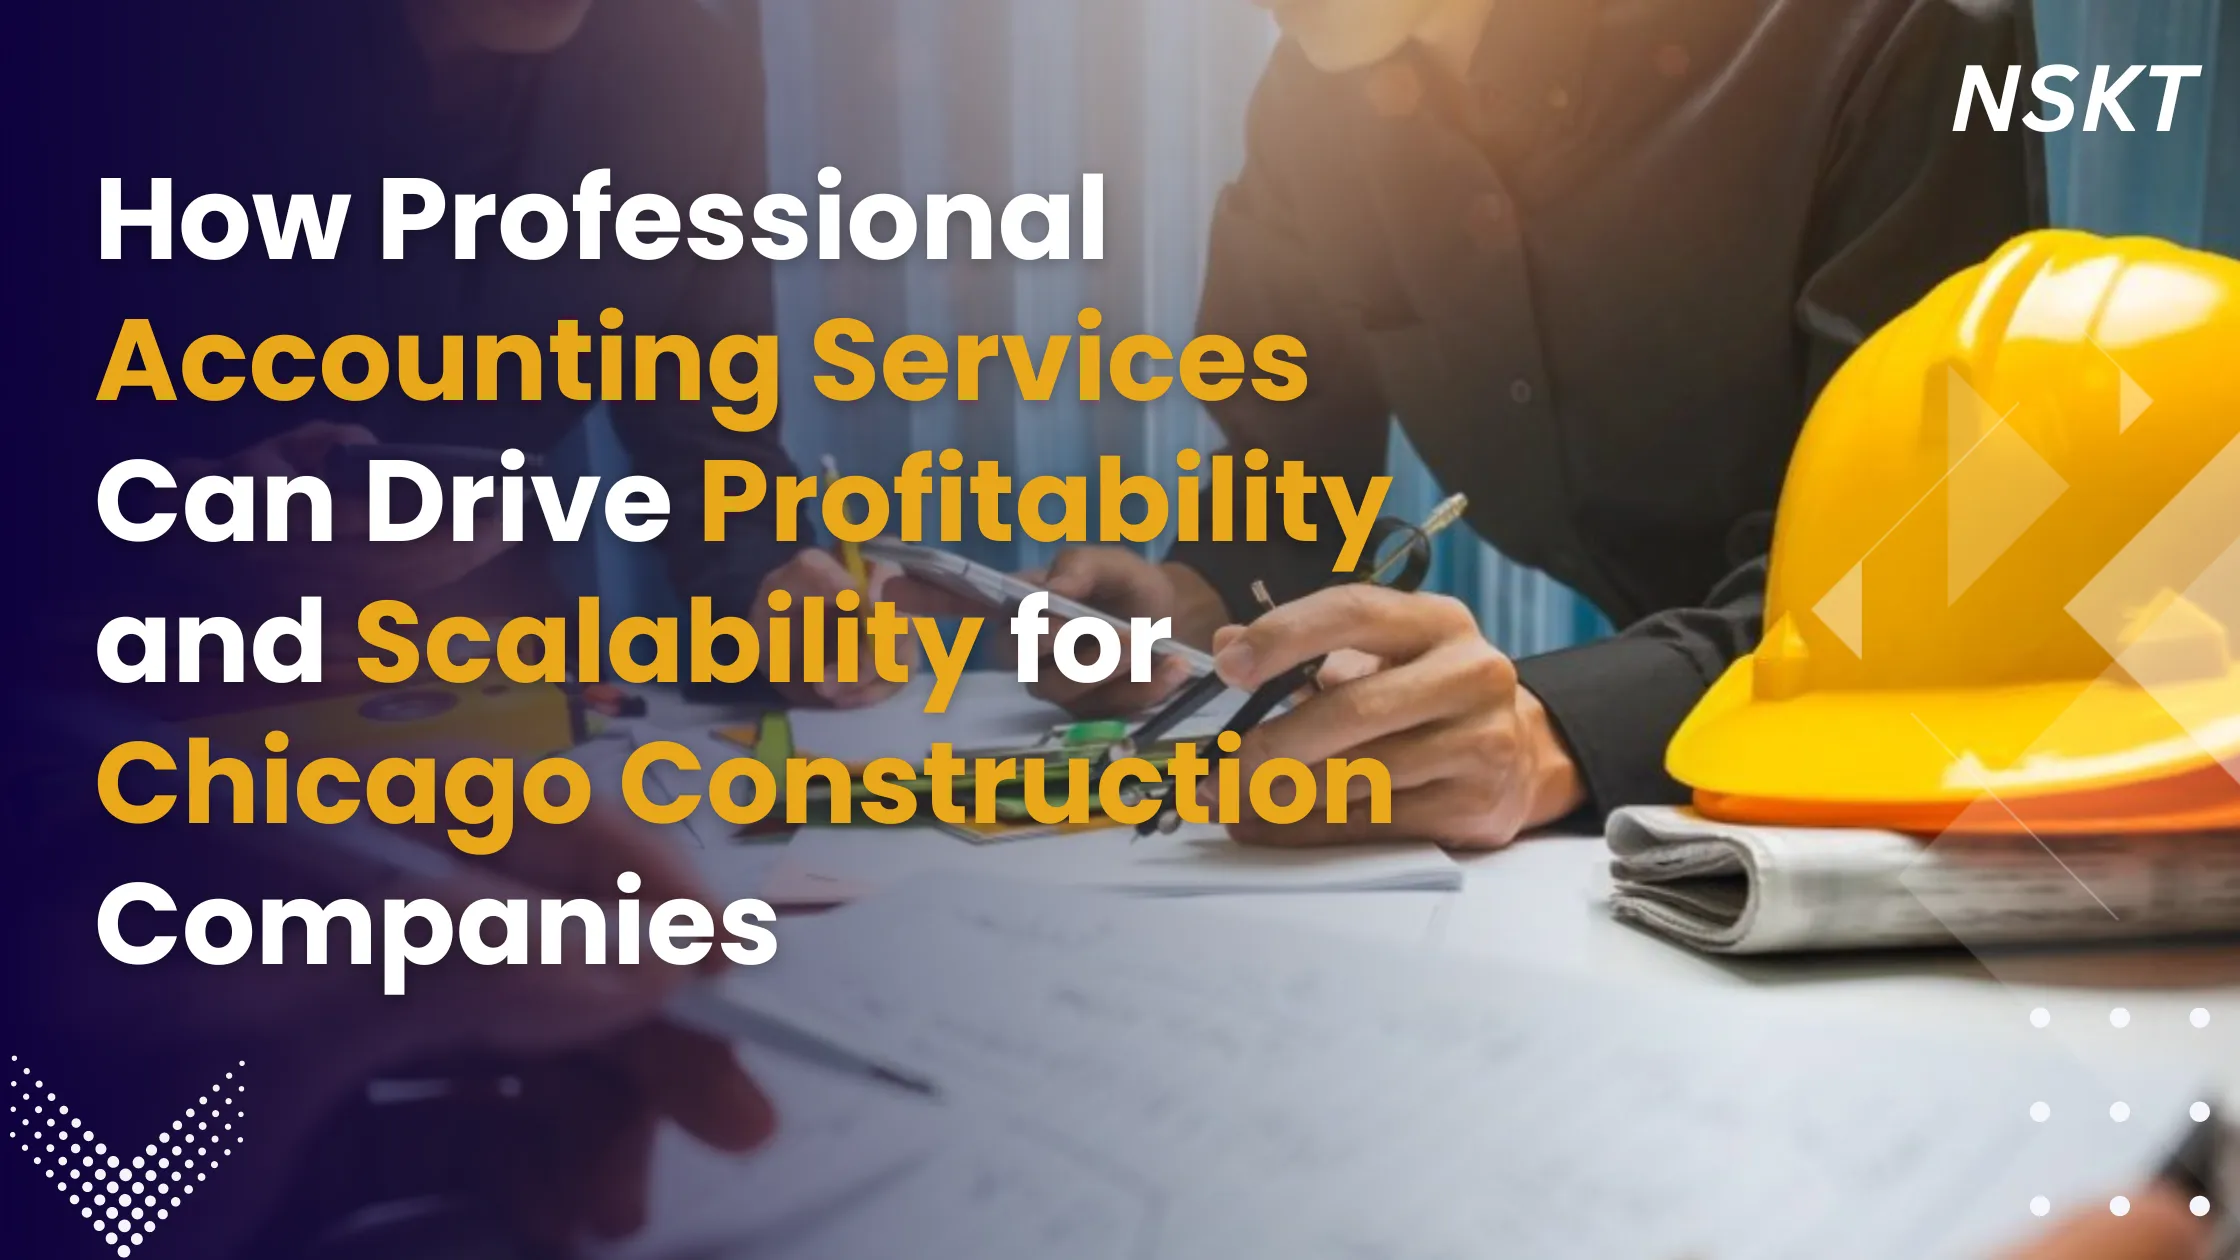 How Professional Accounting Services Can Drive Profitability and Scalability for Chicago Construction Companies 